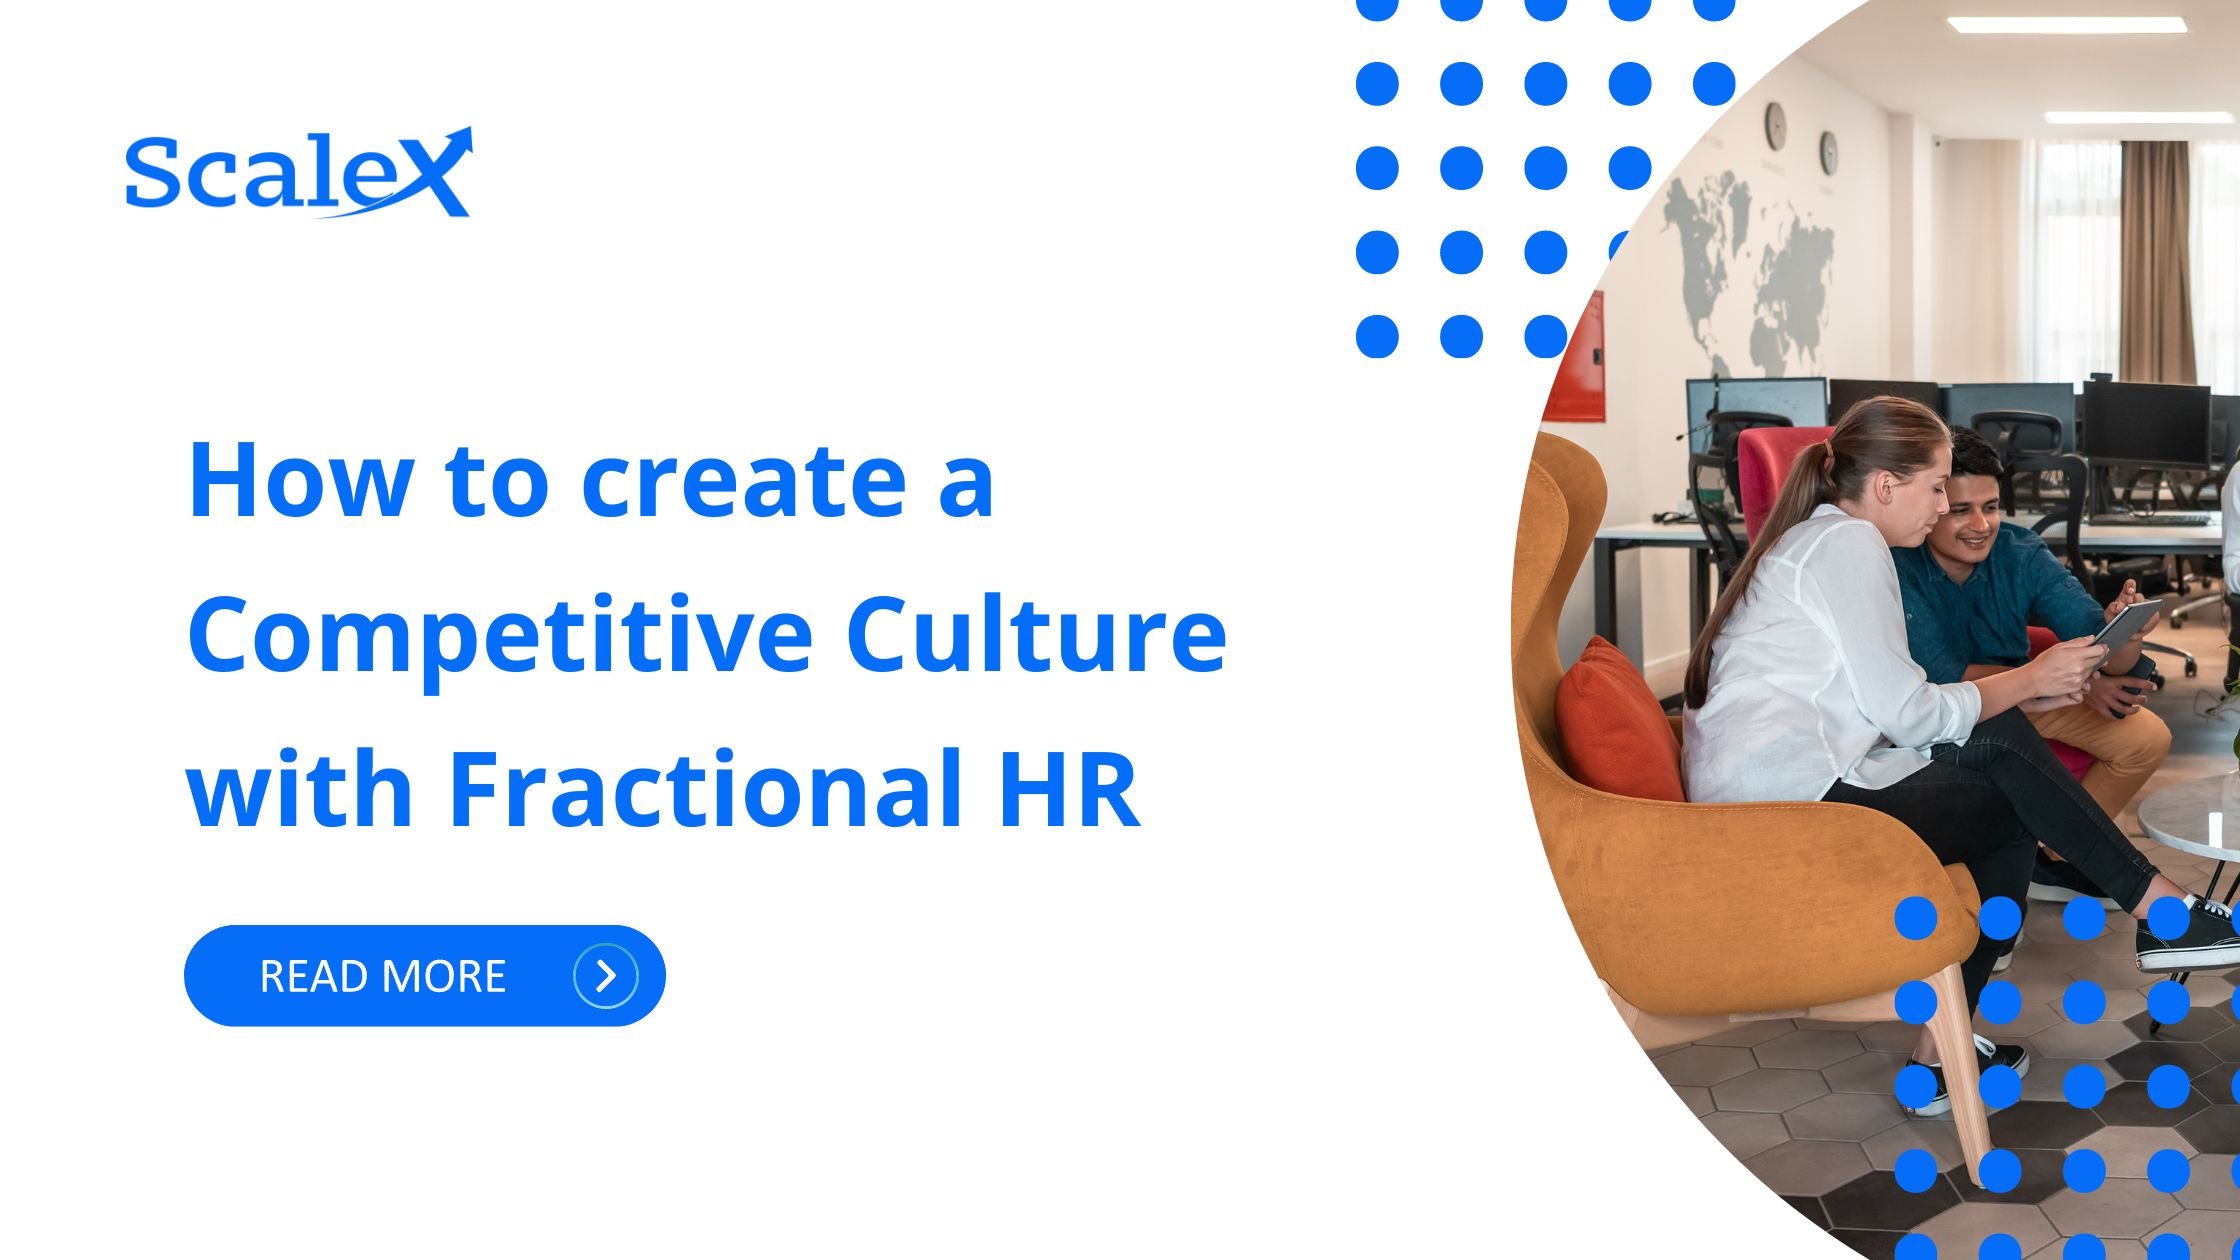 How to Create a Competitive Culture with Fractional HR